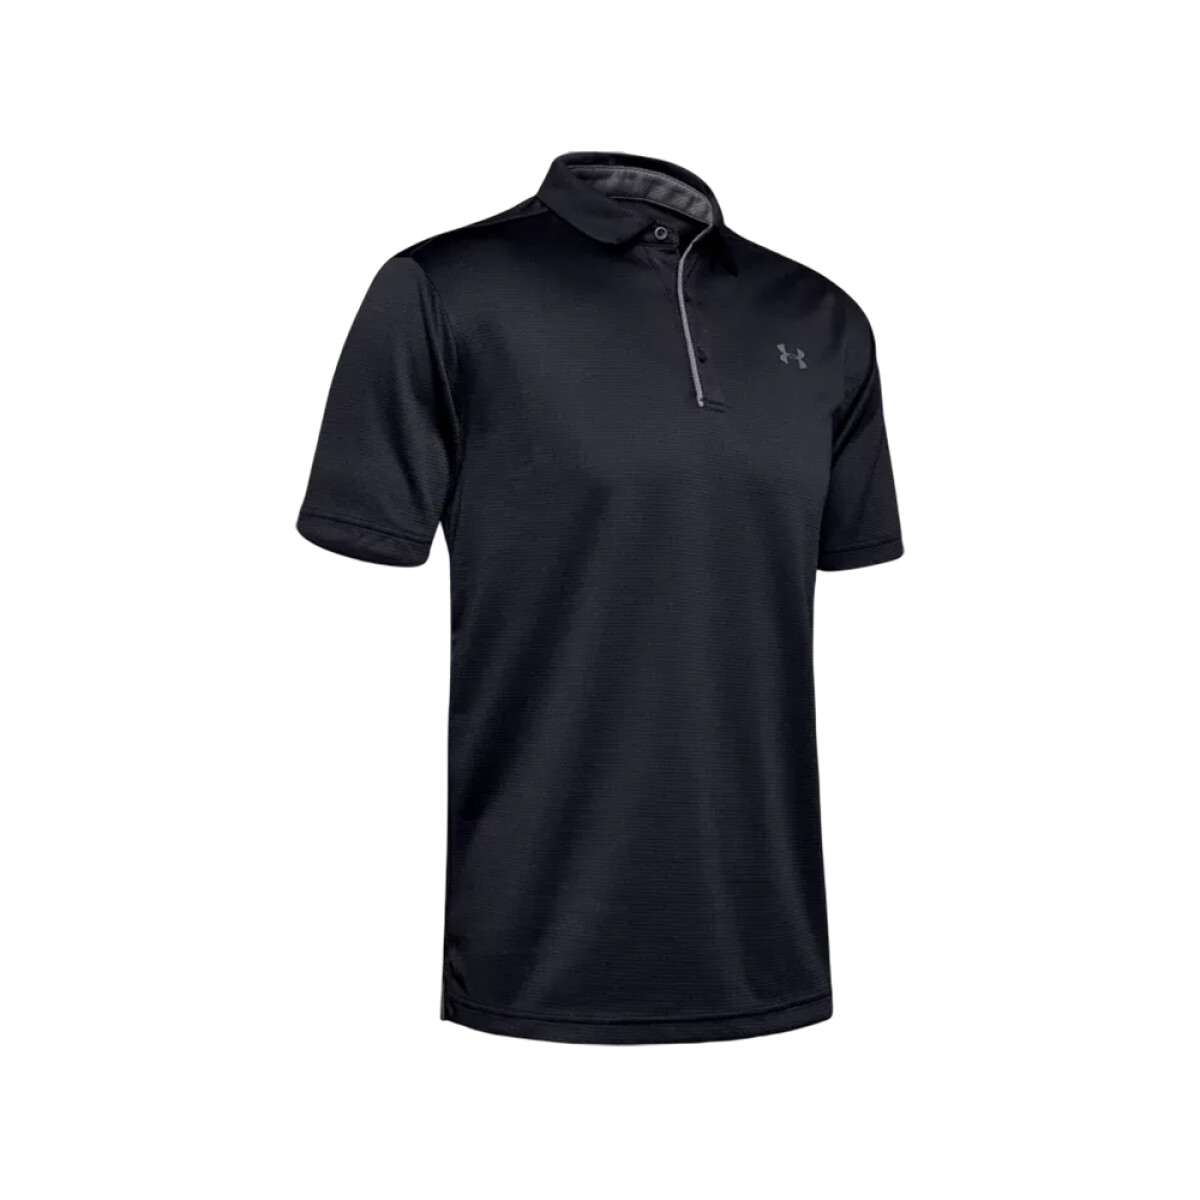 REMERA UNDER ARMOUR TECH POLO UPDATE - Black 